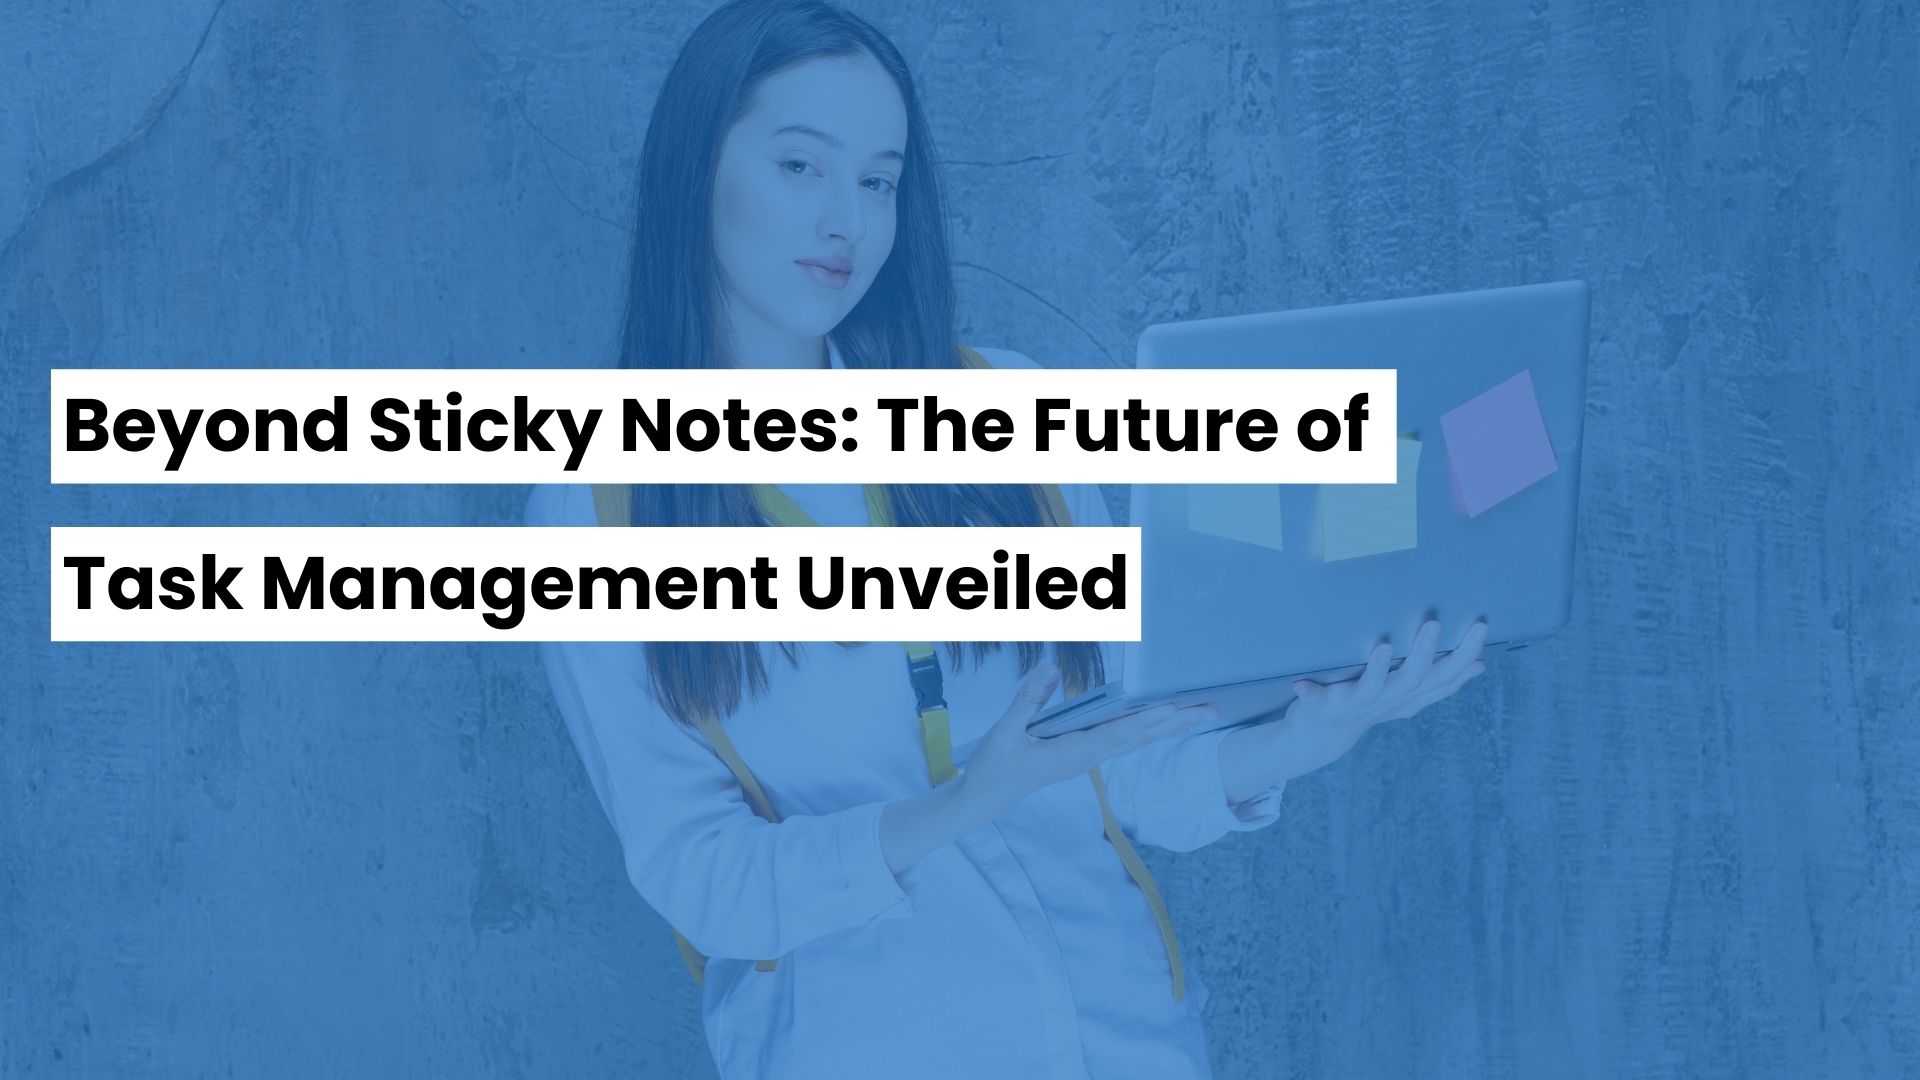 Beyond Sticky Notes: The Future of Task Management Unveiled